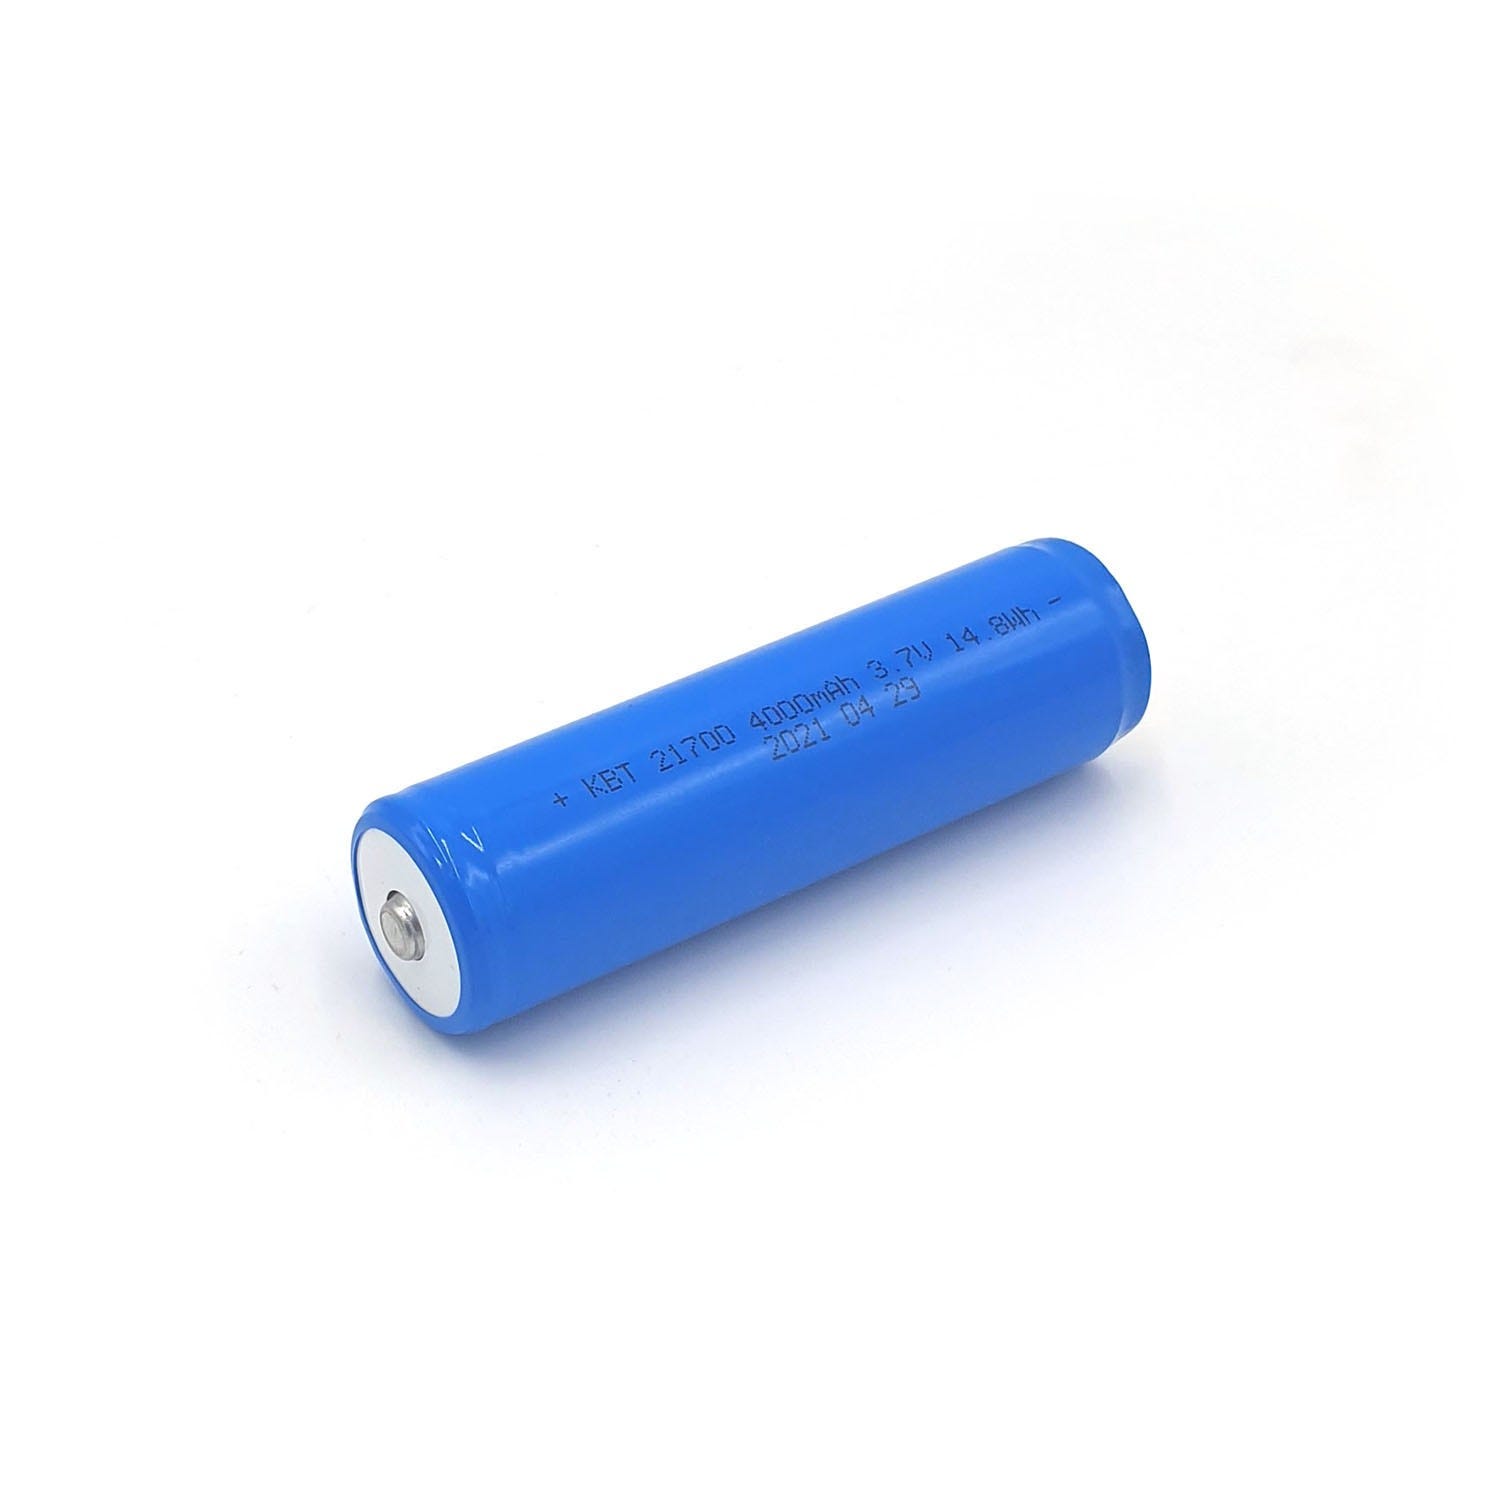 Batterie lithium rechargeable type 21700, 3.7V 4000mAh